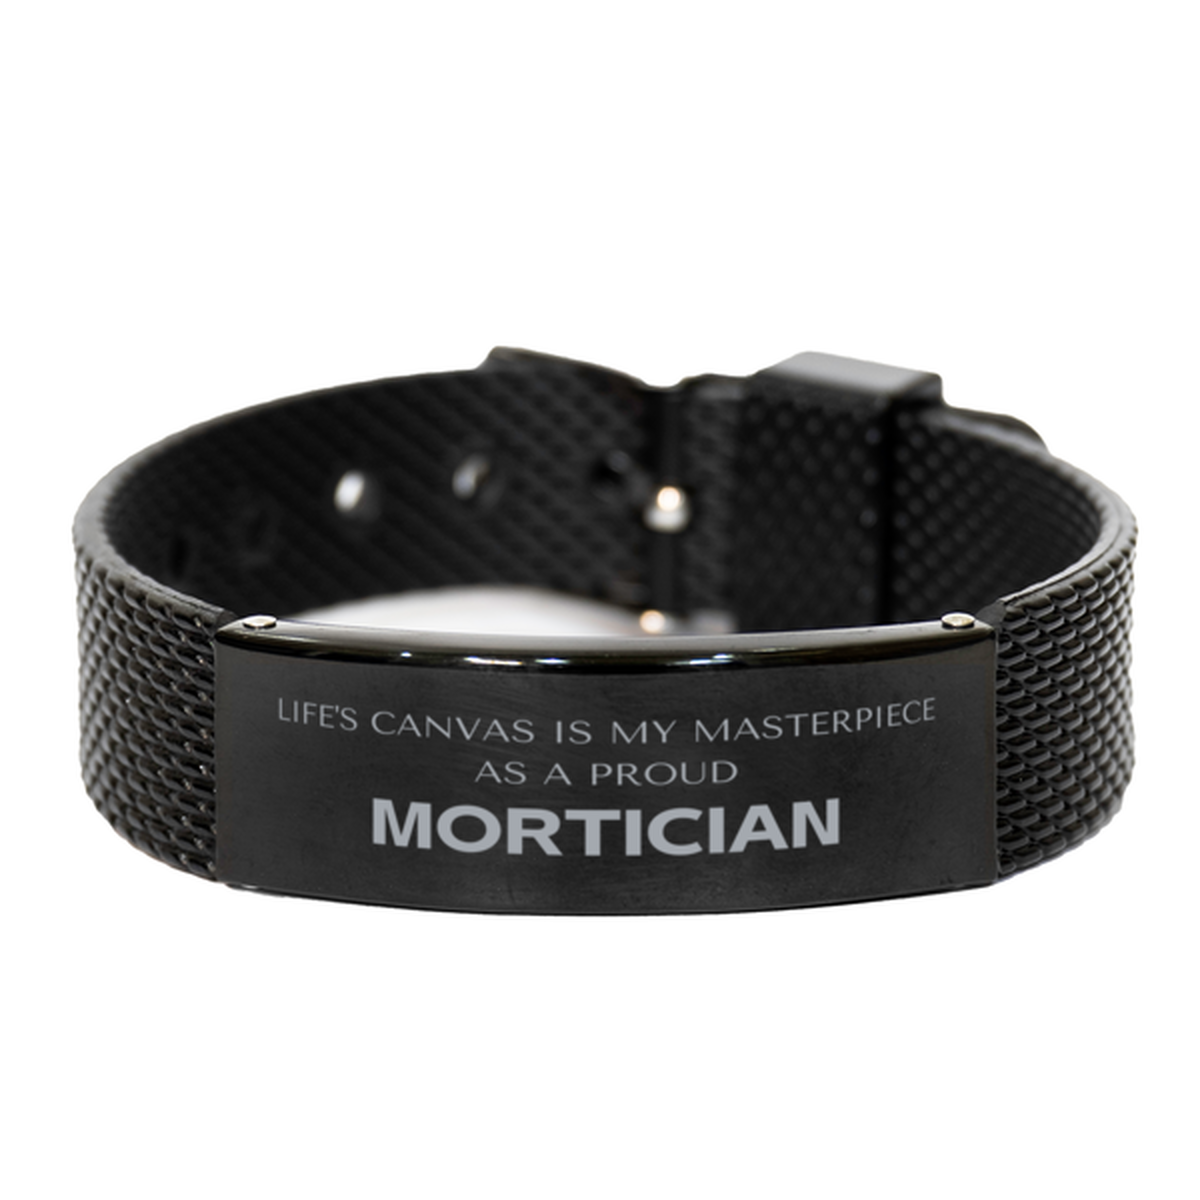 Proud Mortician Gifts, Life's canvas is my masterpiece, Epic Birthday Christmas Unique Black Shark Mesh Bracelet For Mortician, Coworkers, Men, Women, Friends